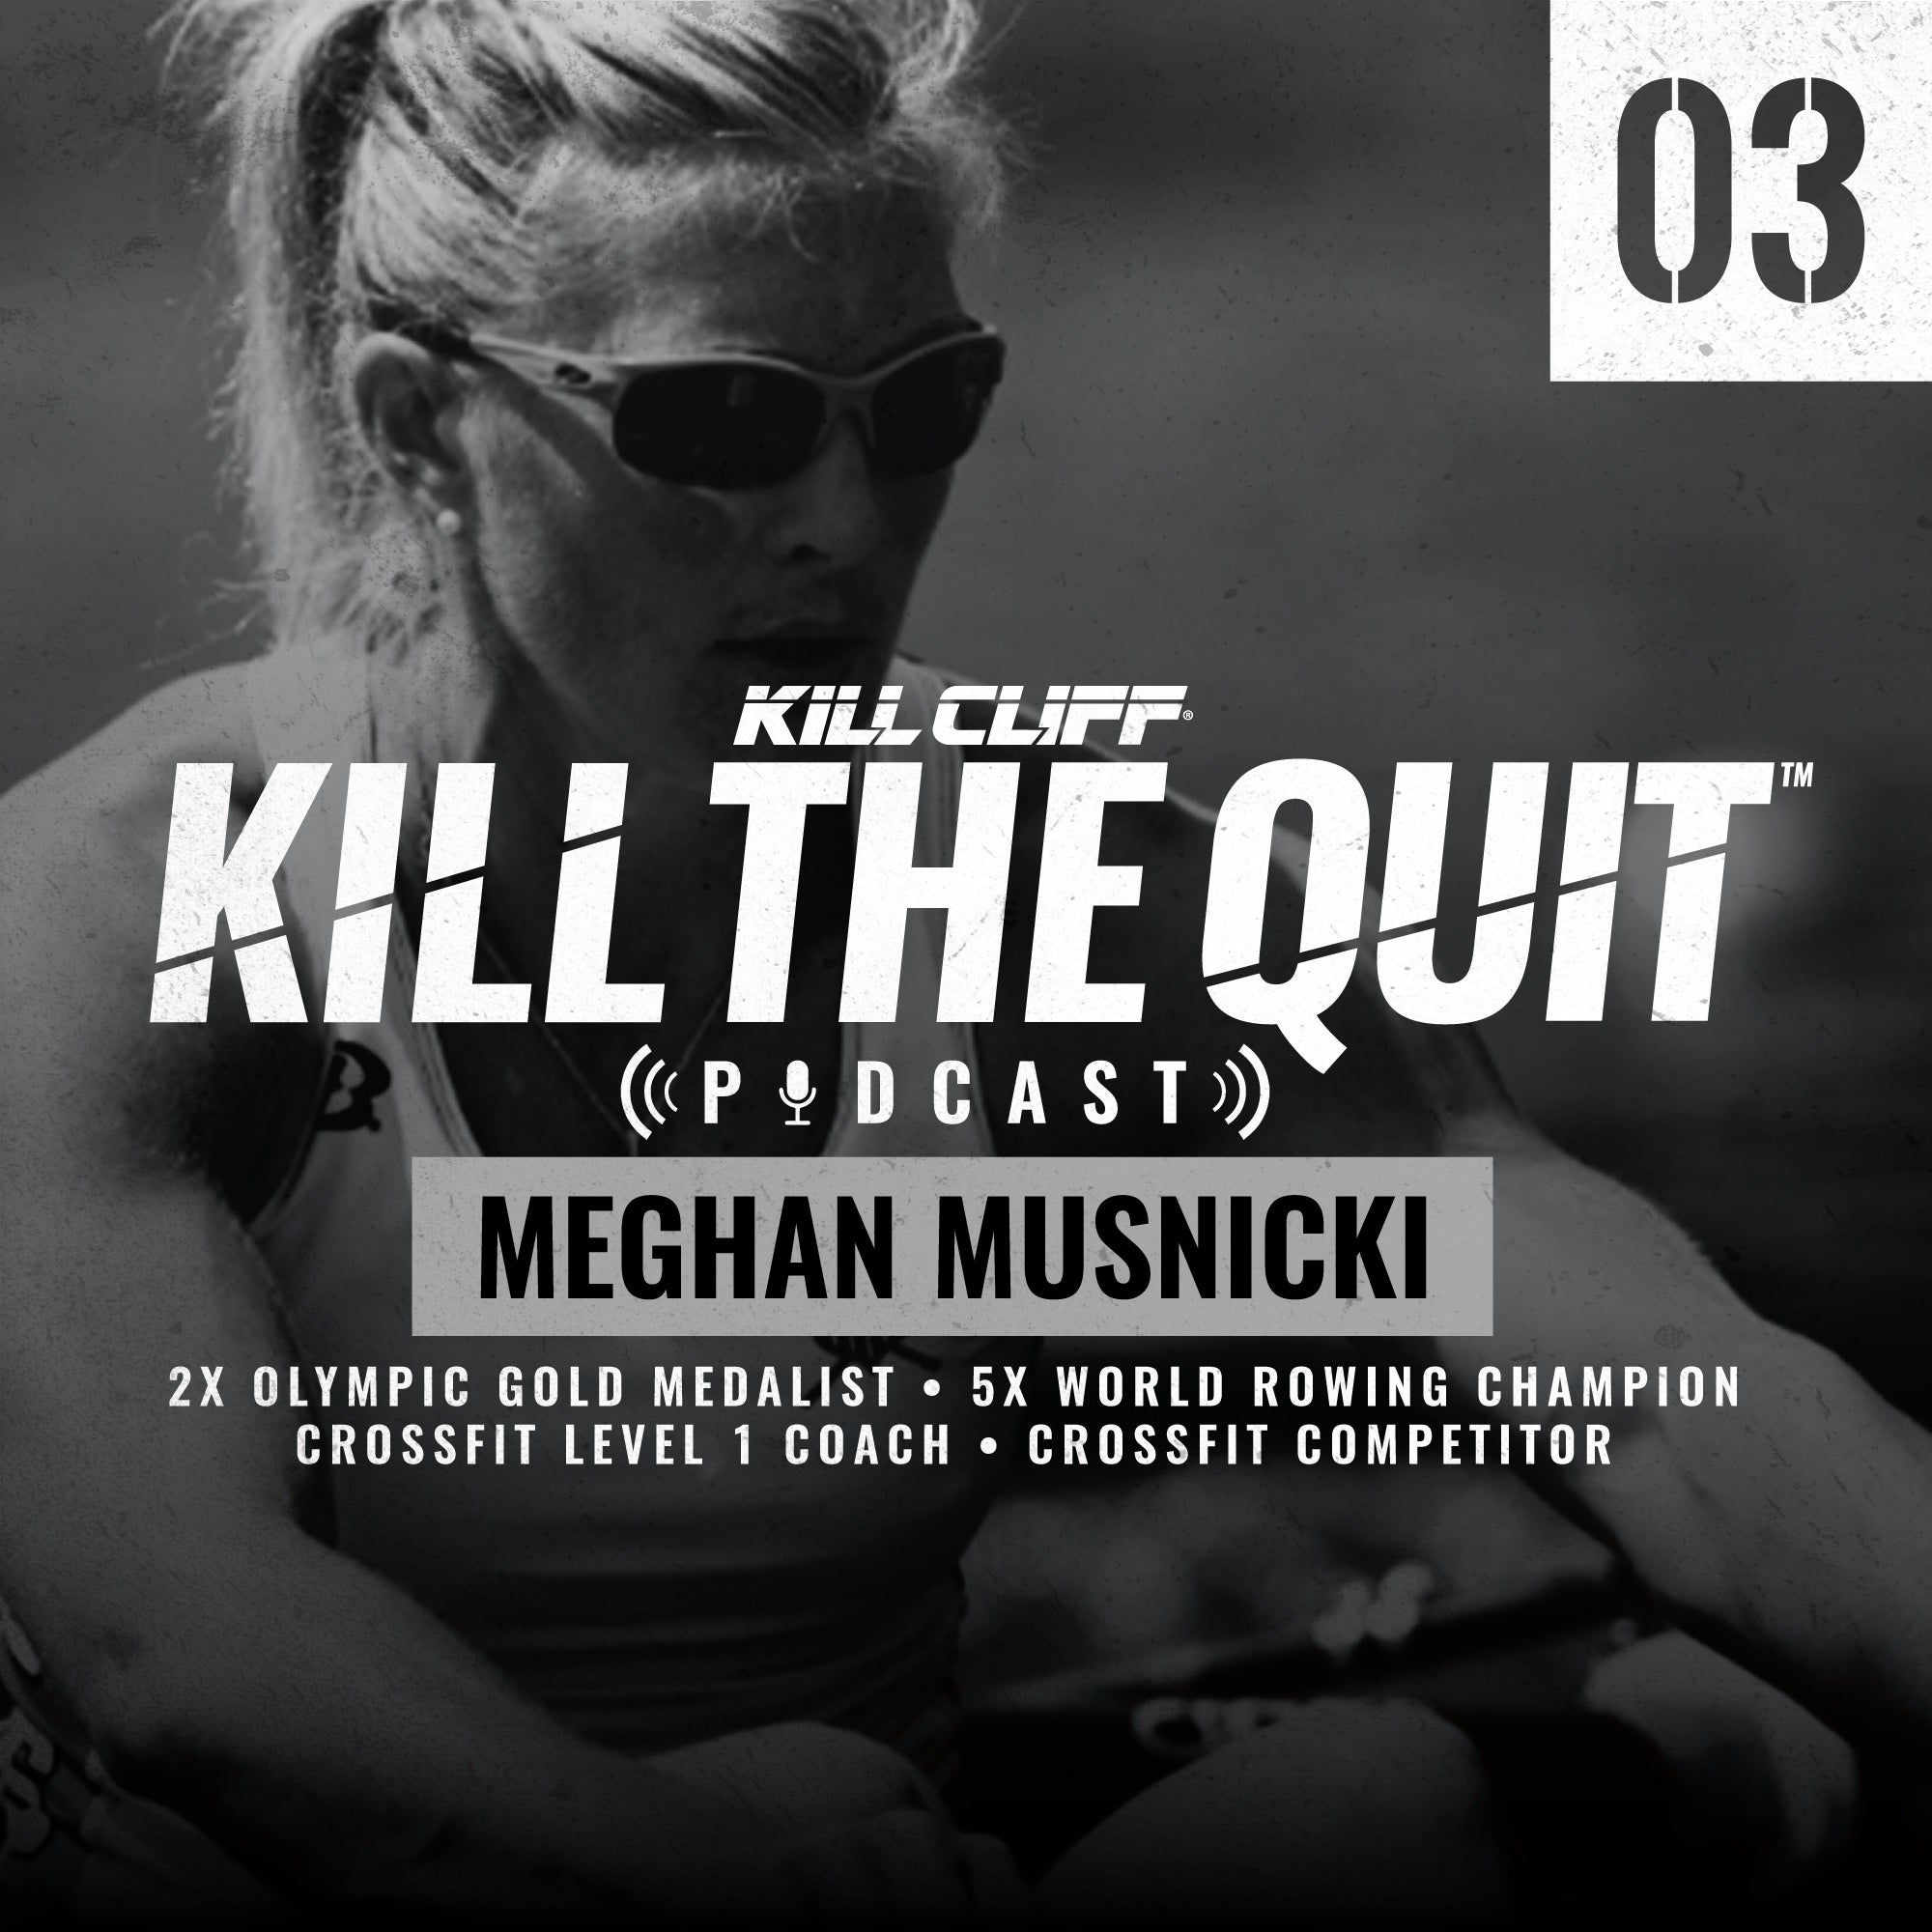 PODCAST Ep. 003 - Meghan Musnicki - Kill Cliff